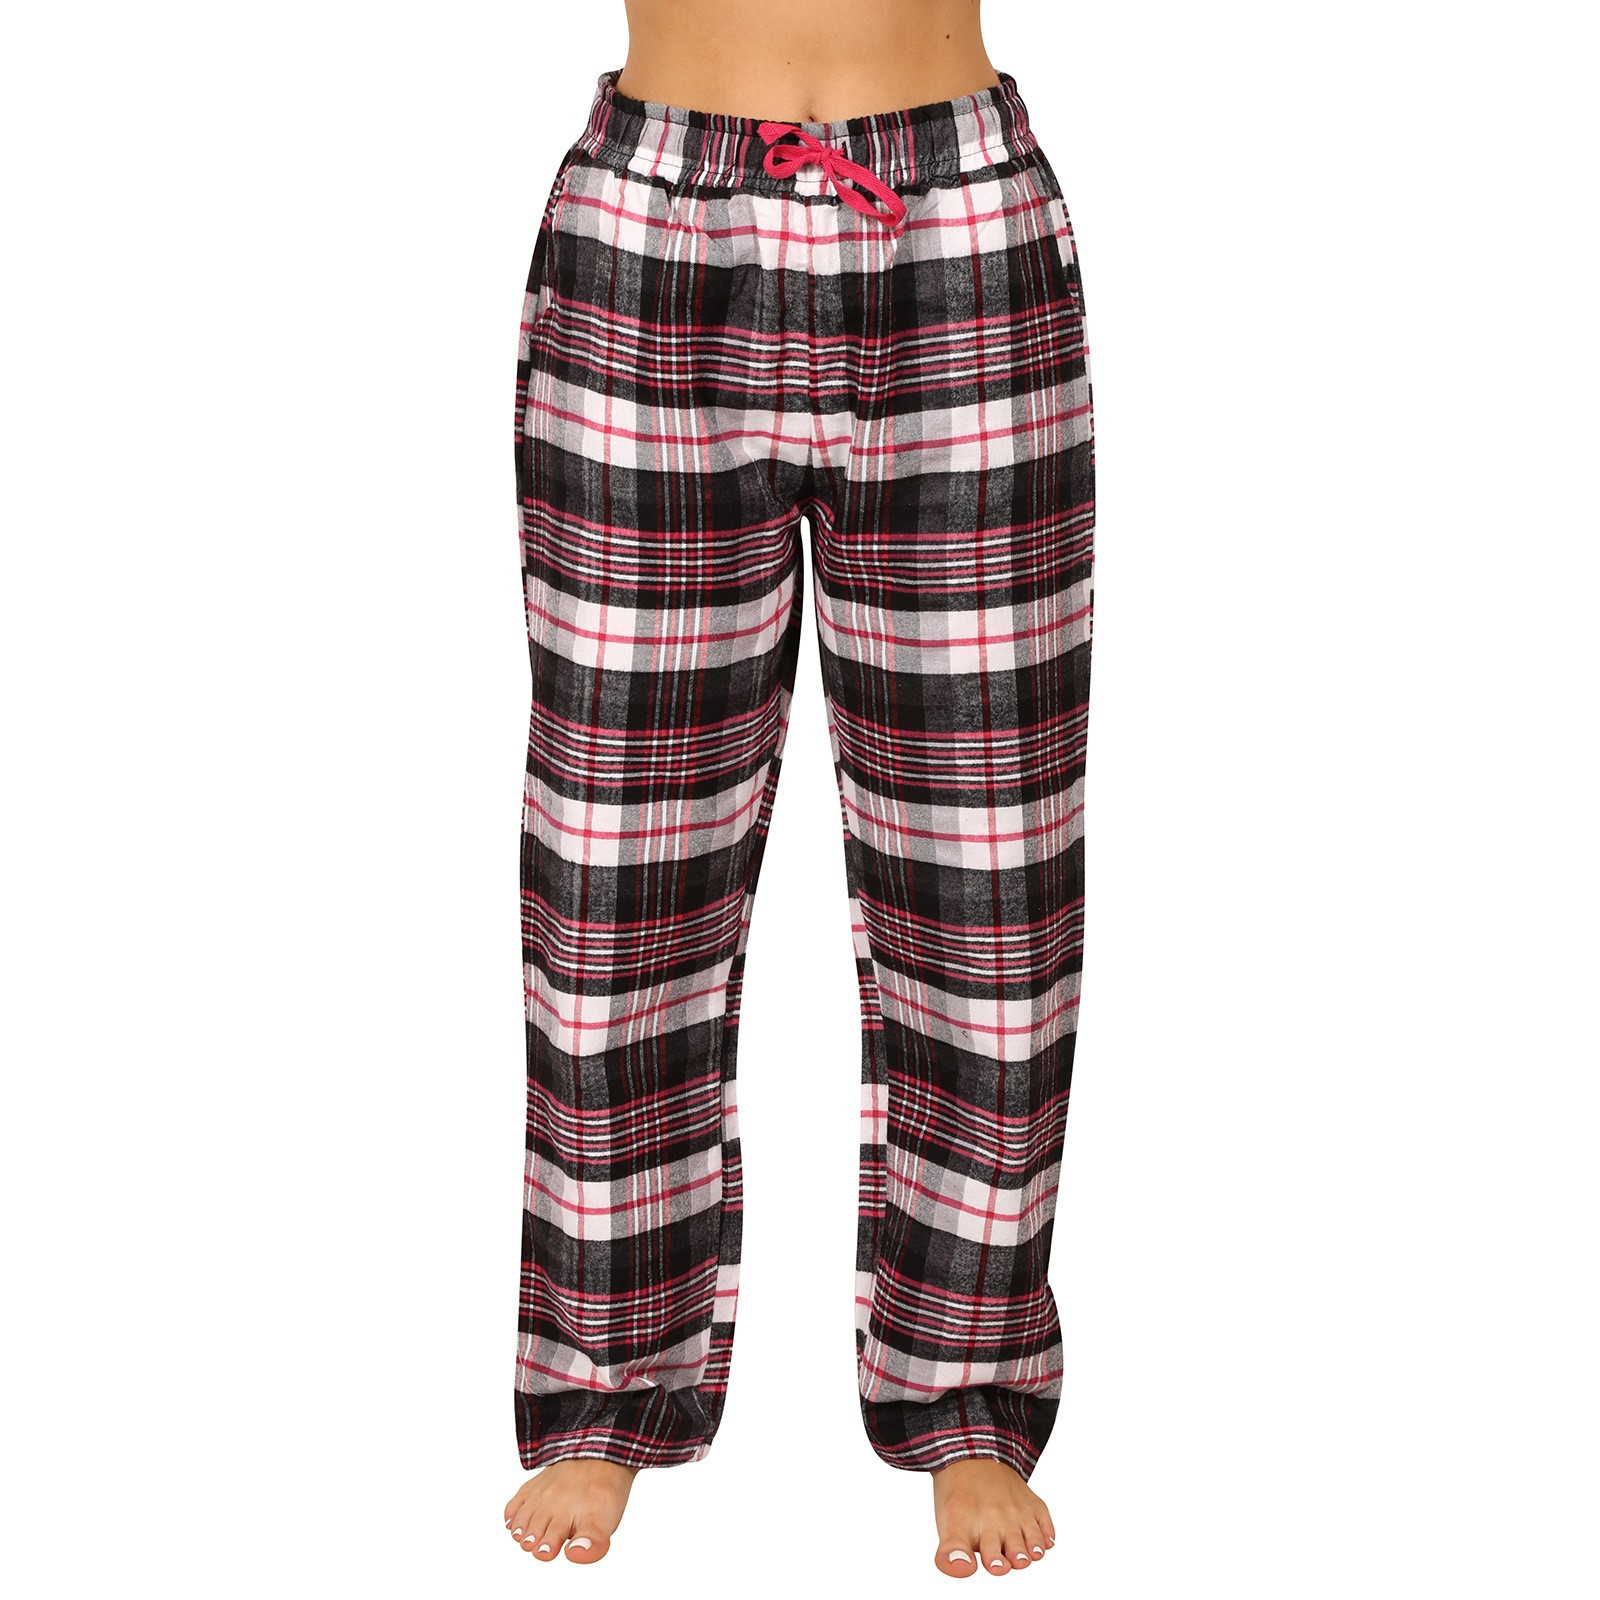 Women's homemade trousers Molvy multicolored